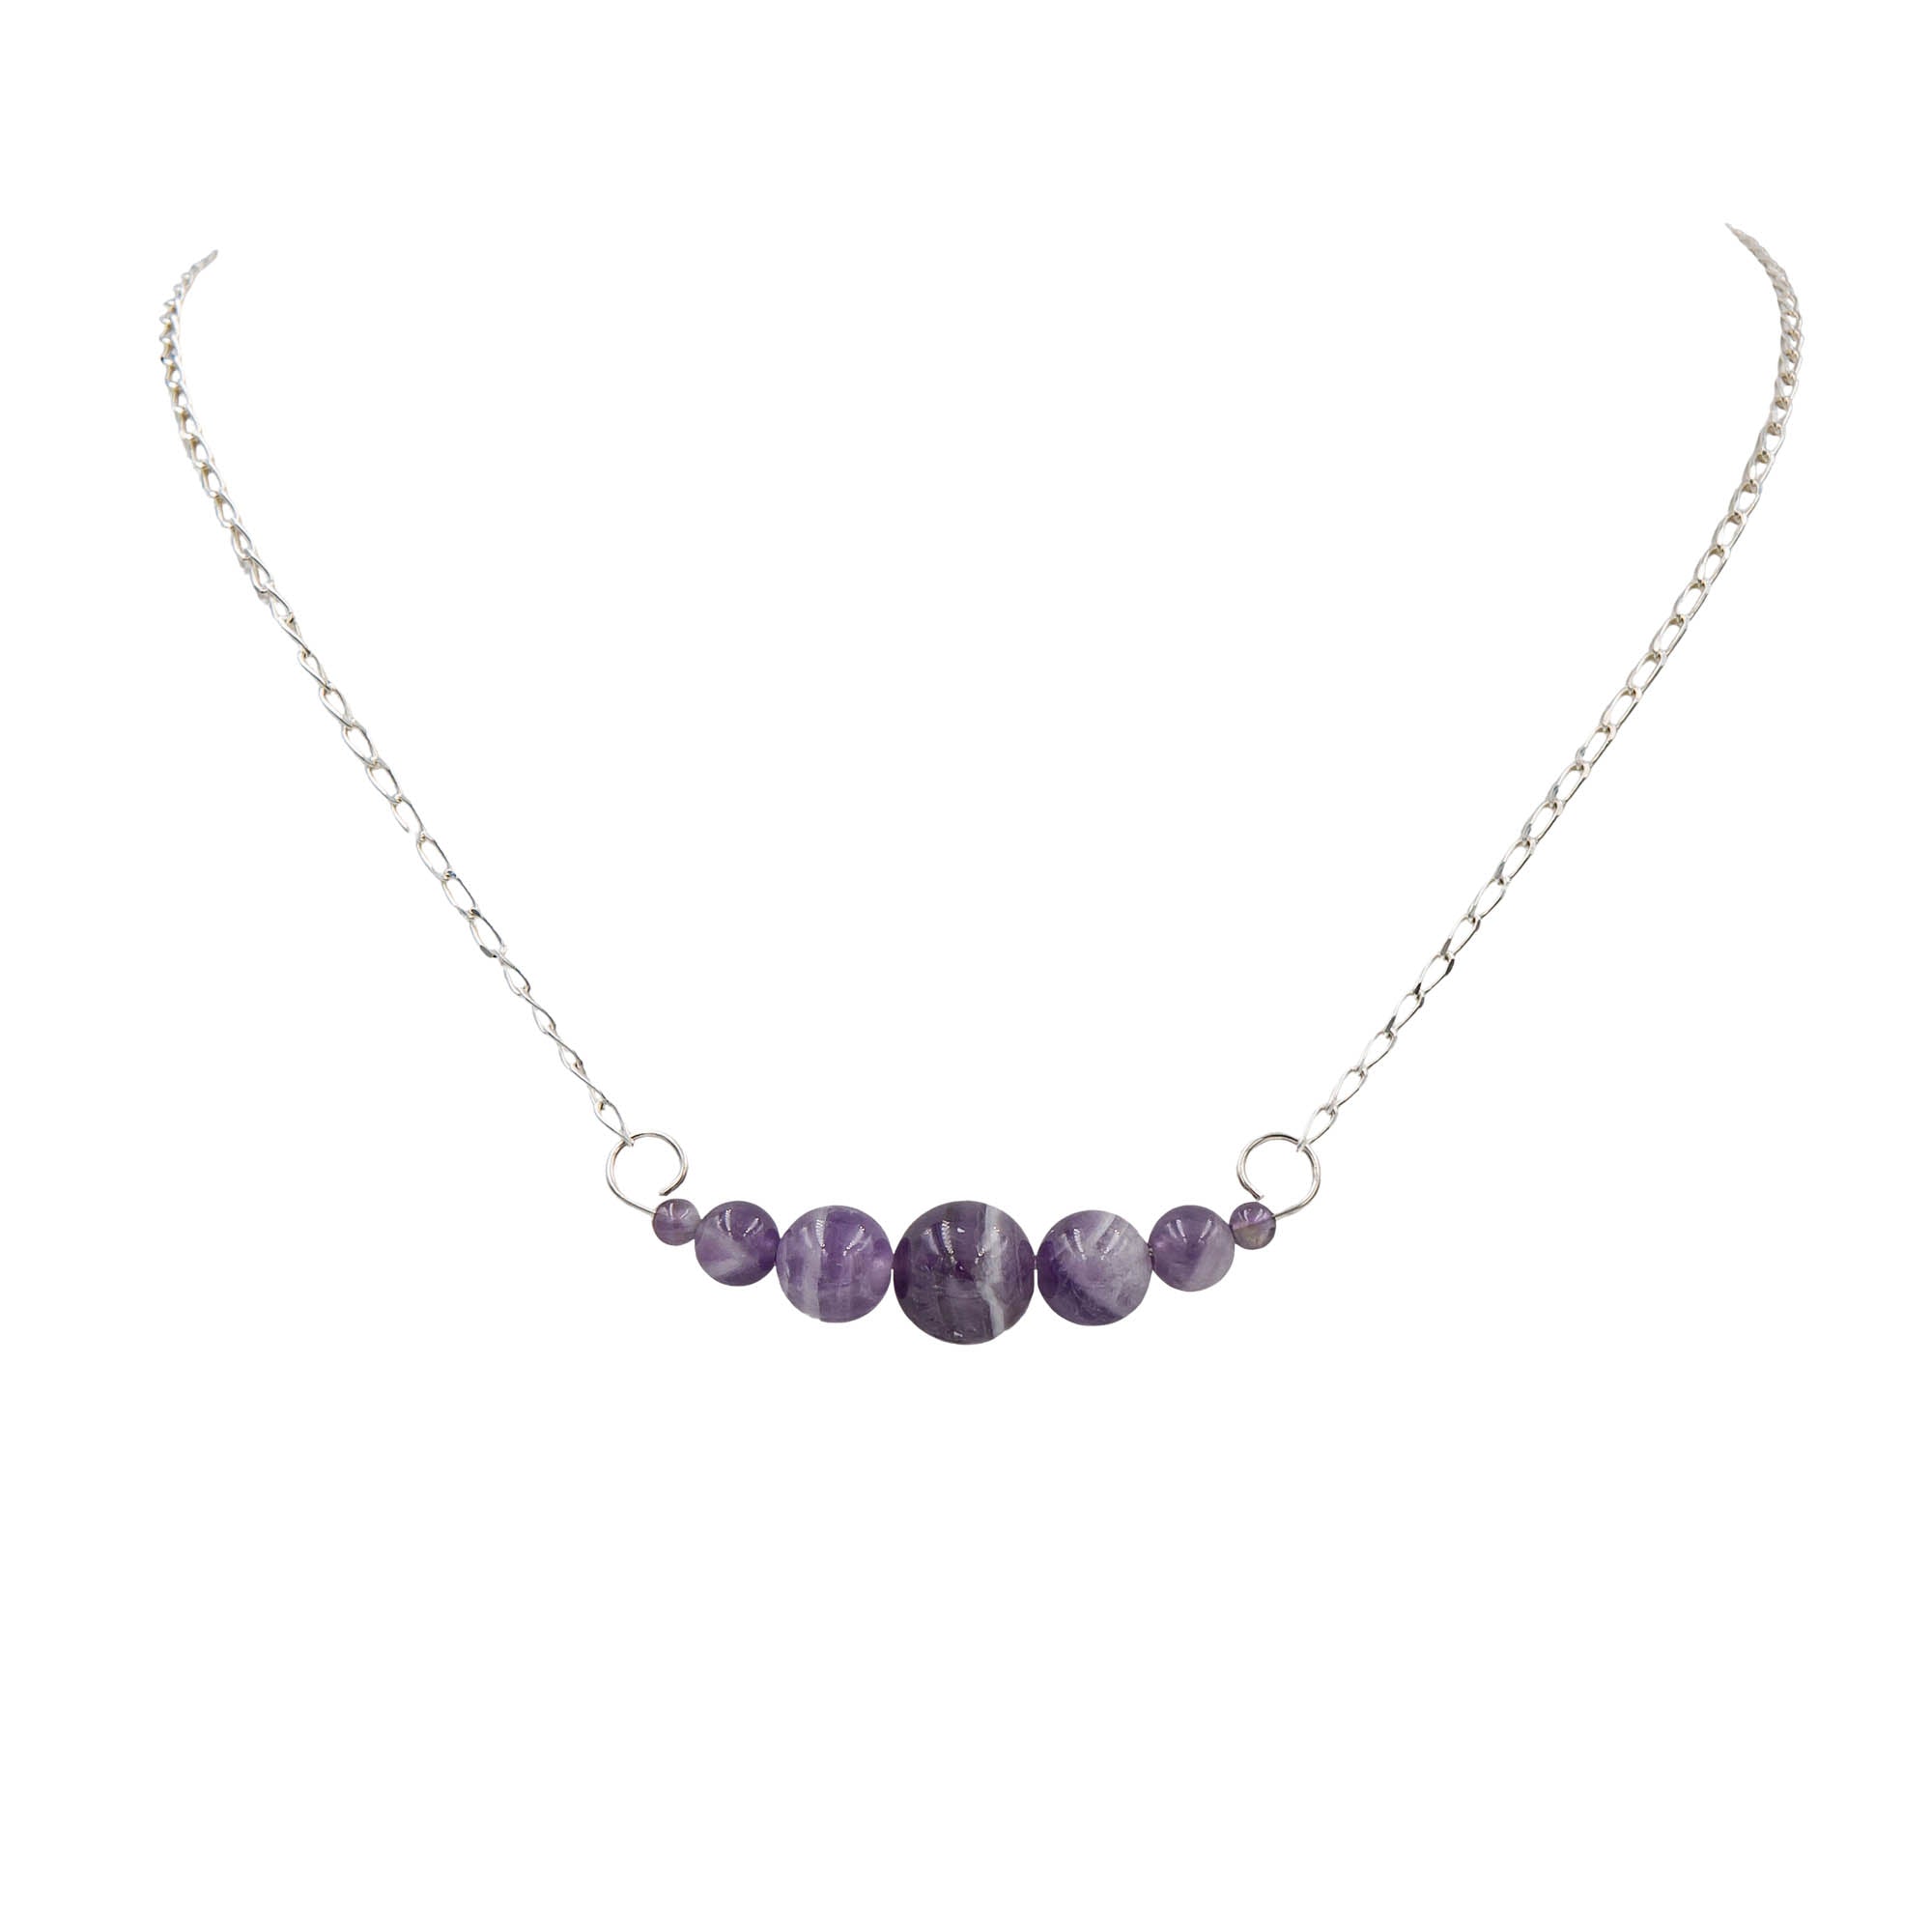 Earth Song Jewelry ~ Strikingly banded Amethysts in different sizes shine as they dangle from a sterling silver bar.